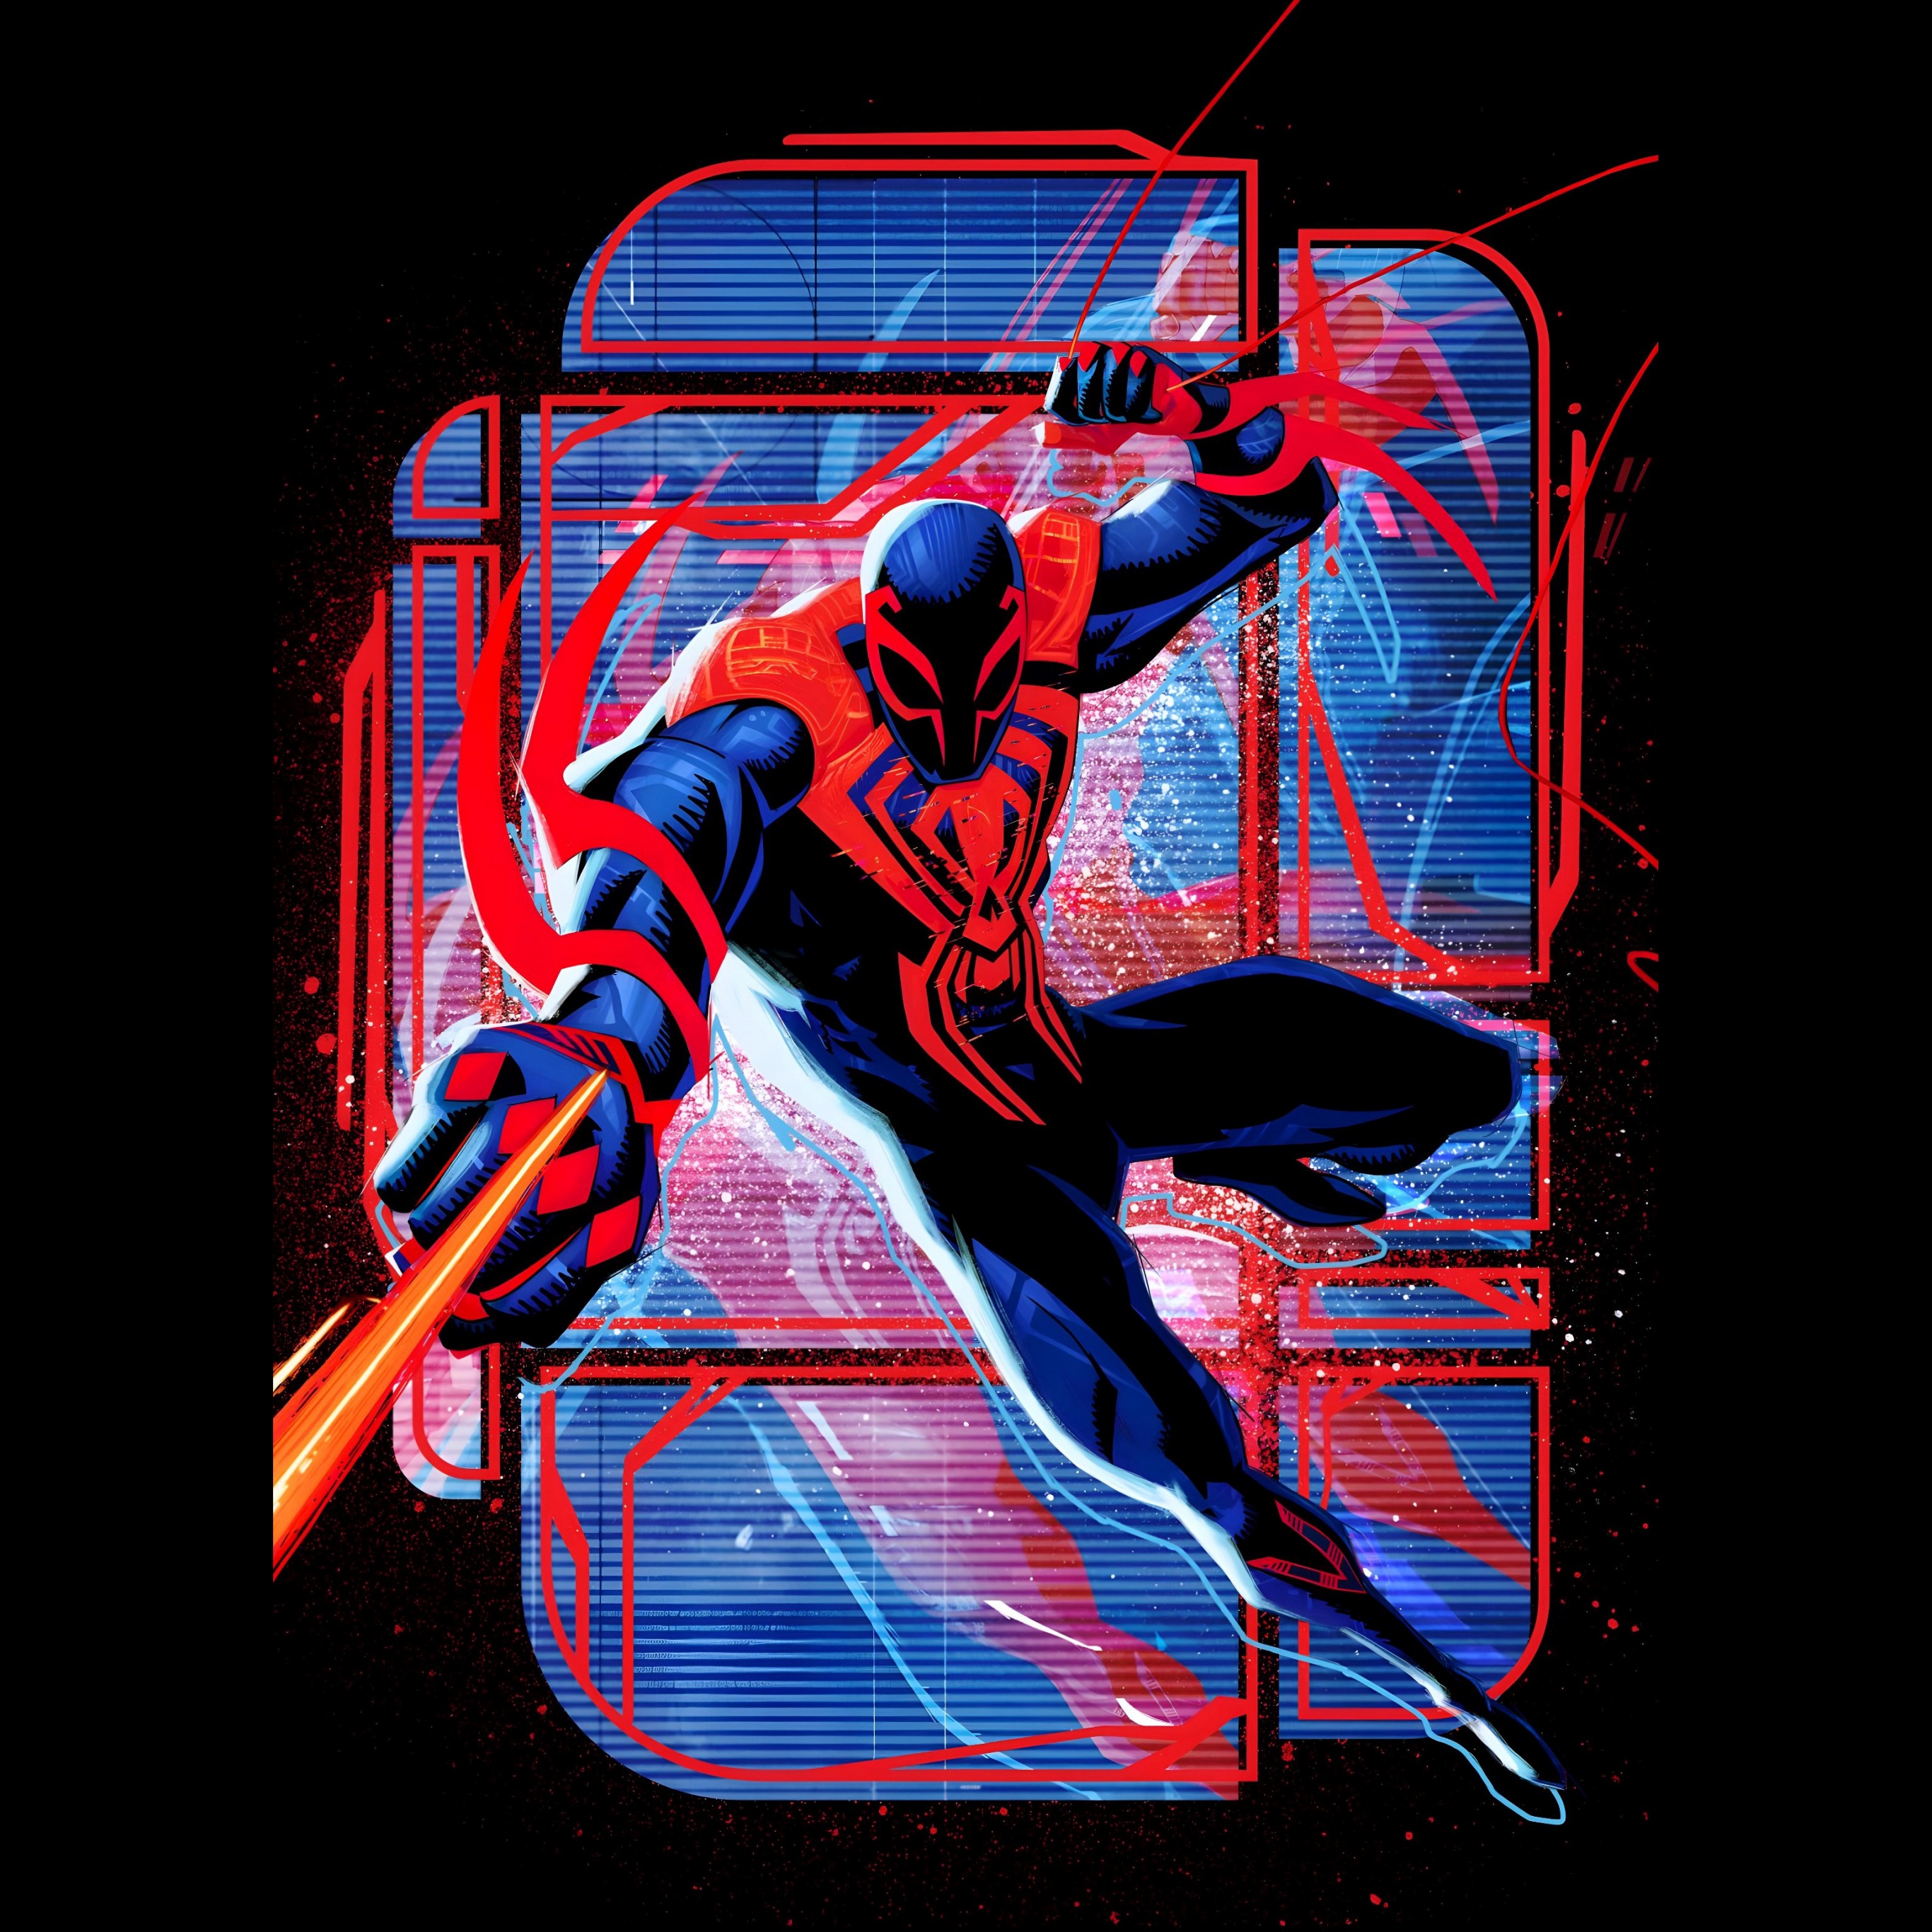 Spiderman 2099 Cyber IPhone Wallpaper  IPhone Wallpapers  iPhone  Wallpapers  Marvel spiderman art Spiderman Spiderman pictures